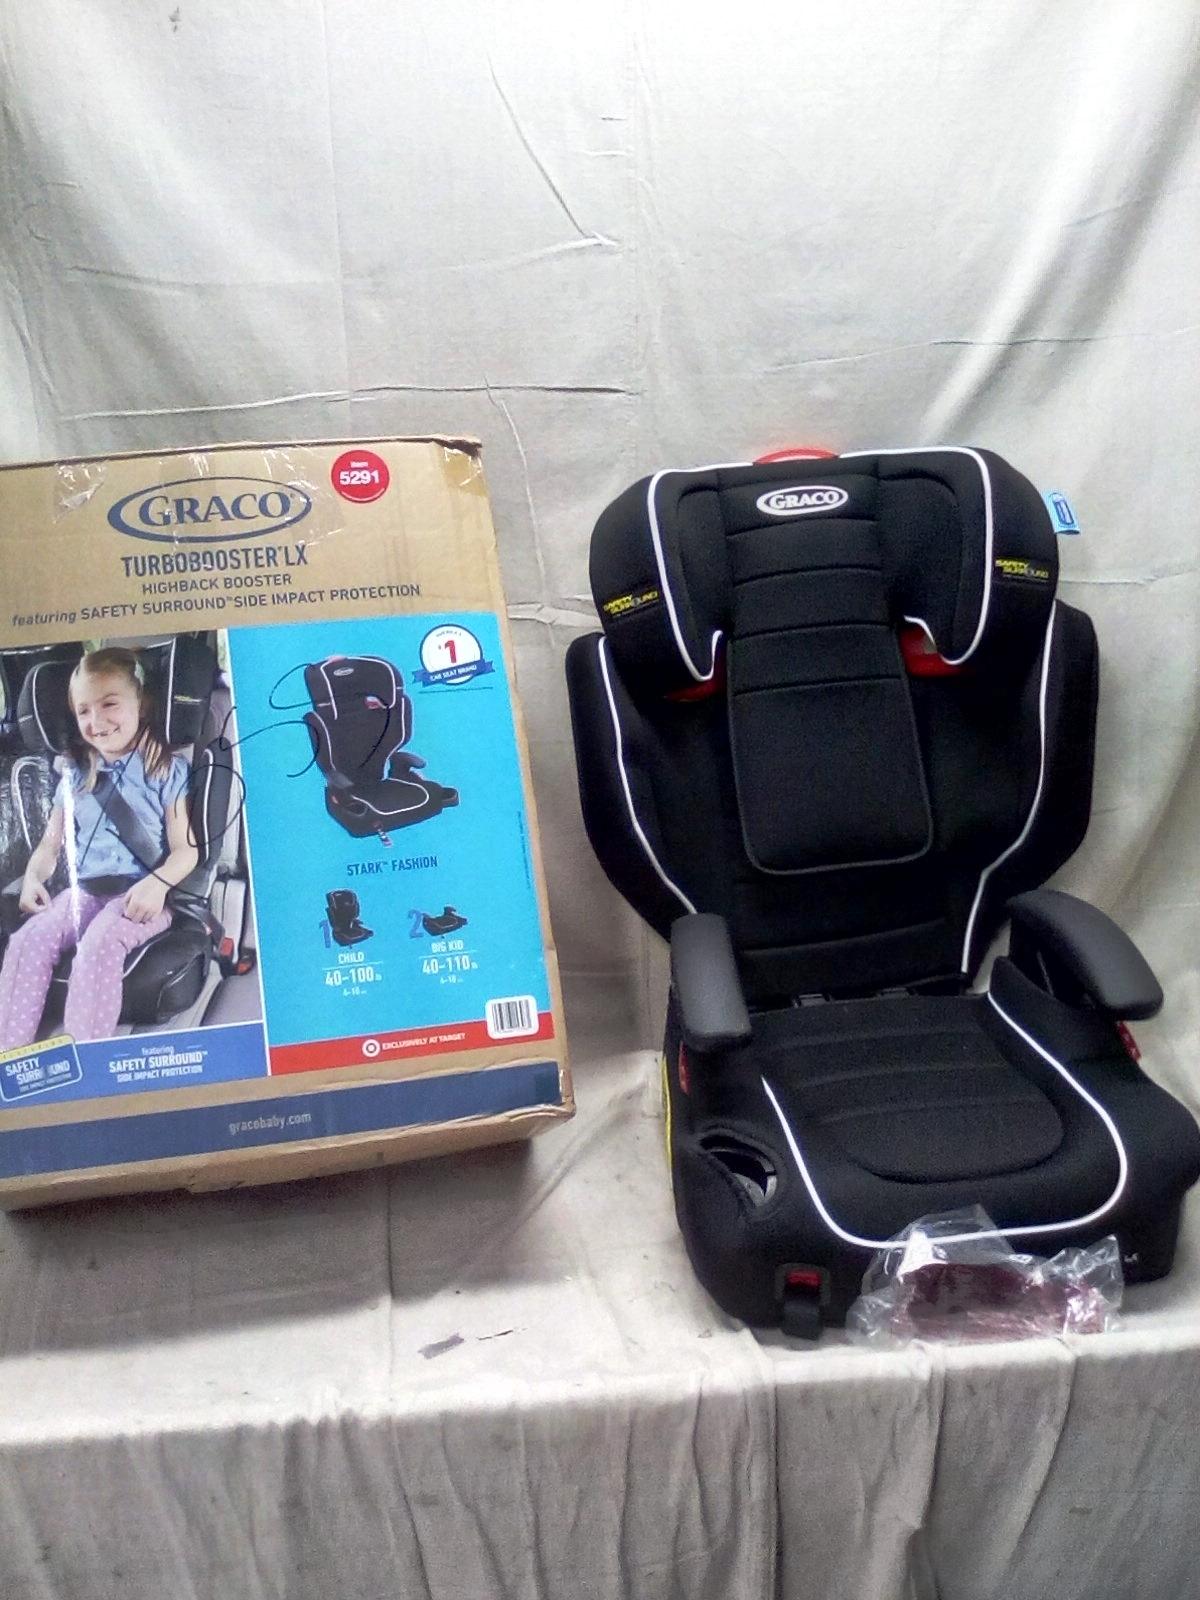 Graco TurboBooster LX Car Seat